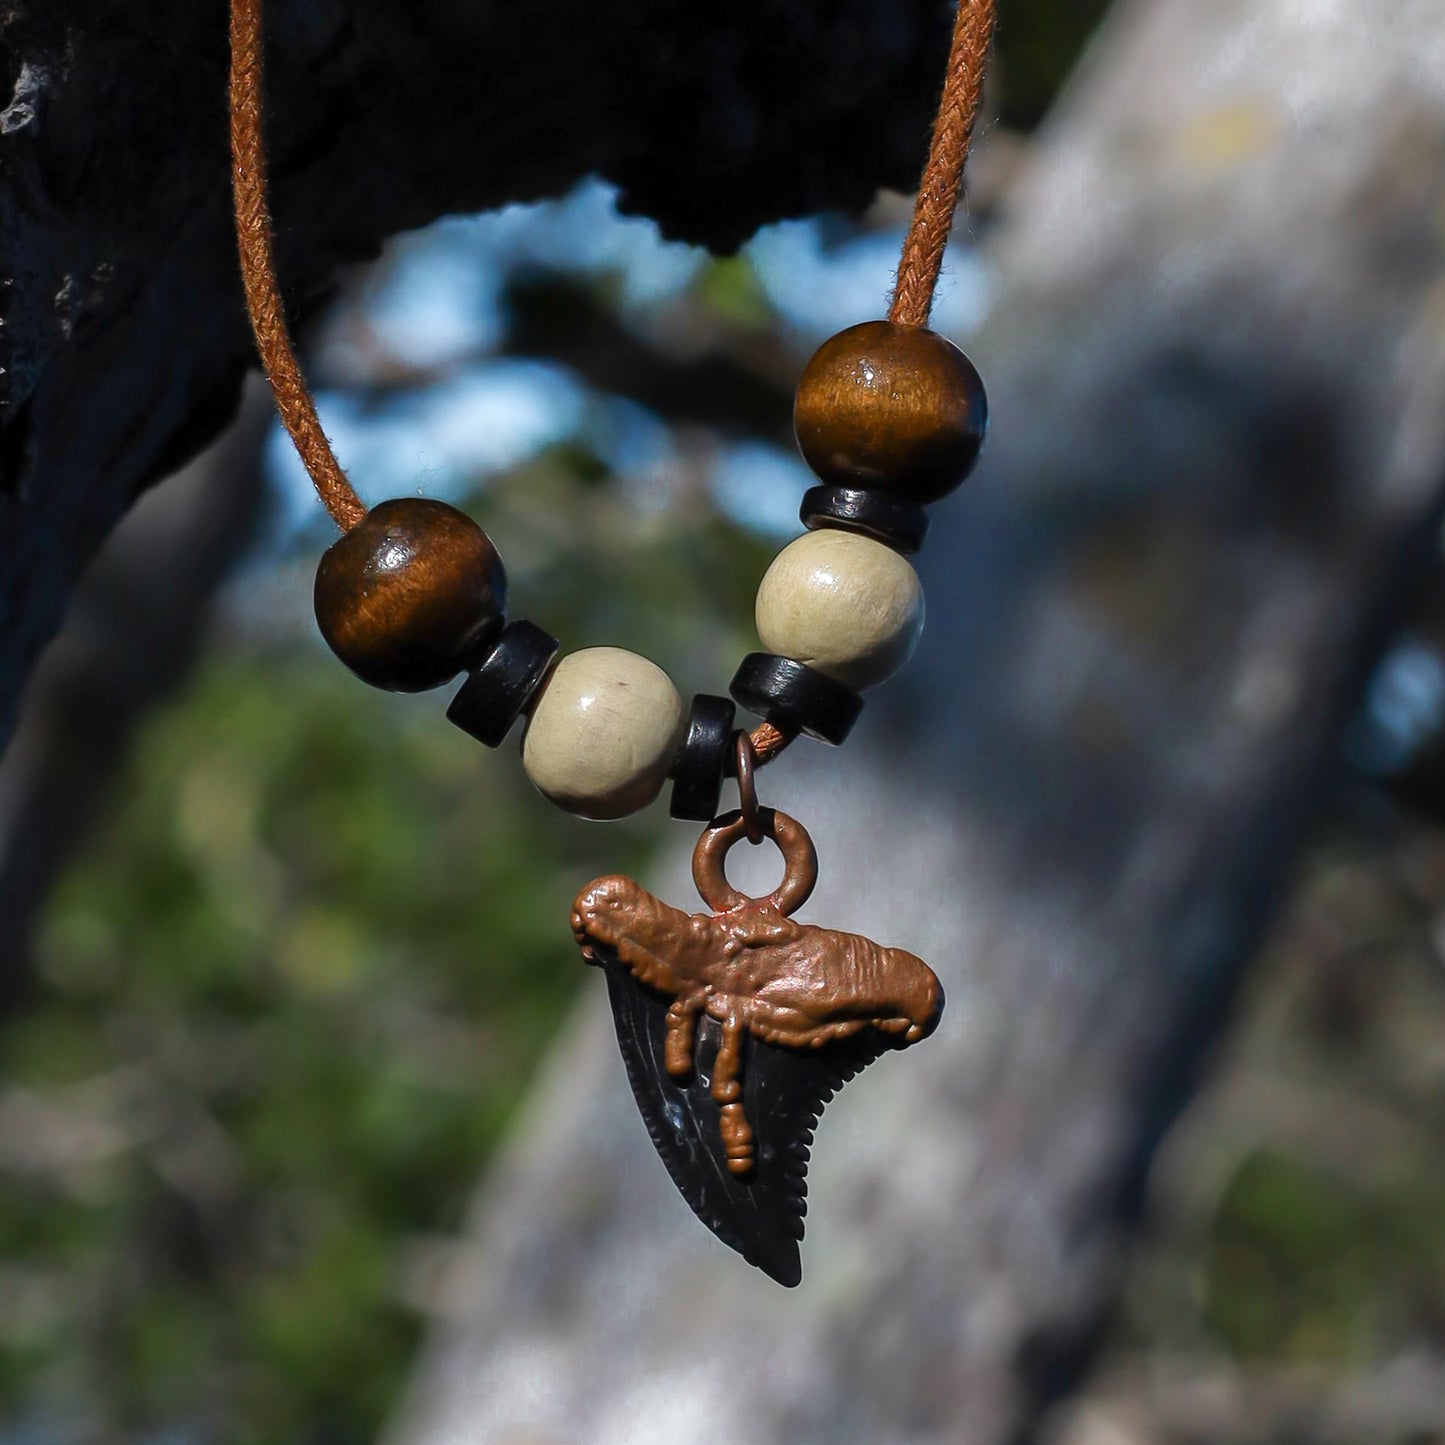 Hemi/Snaggletooth Florida Fossil Shark Tooth Copper Pendant Necklace Beads